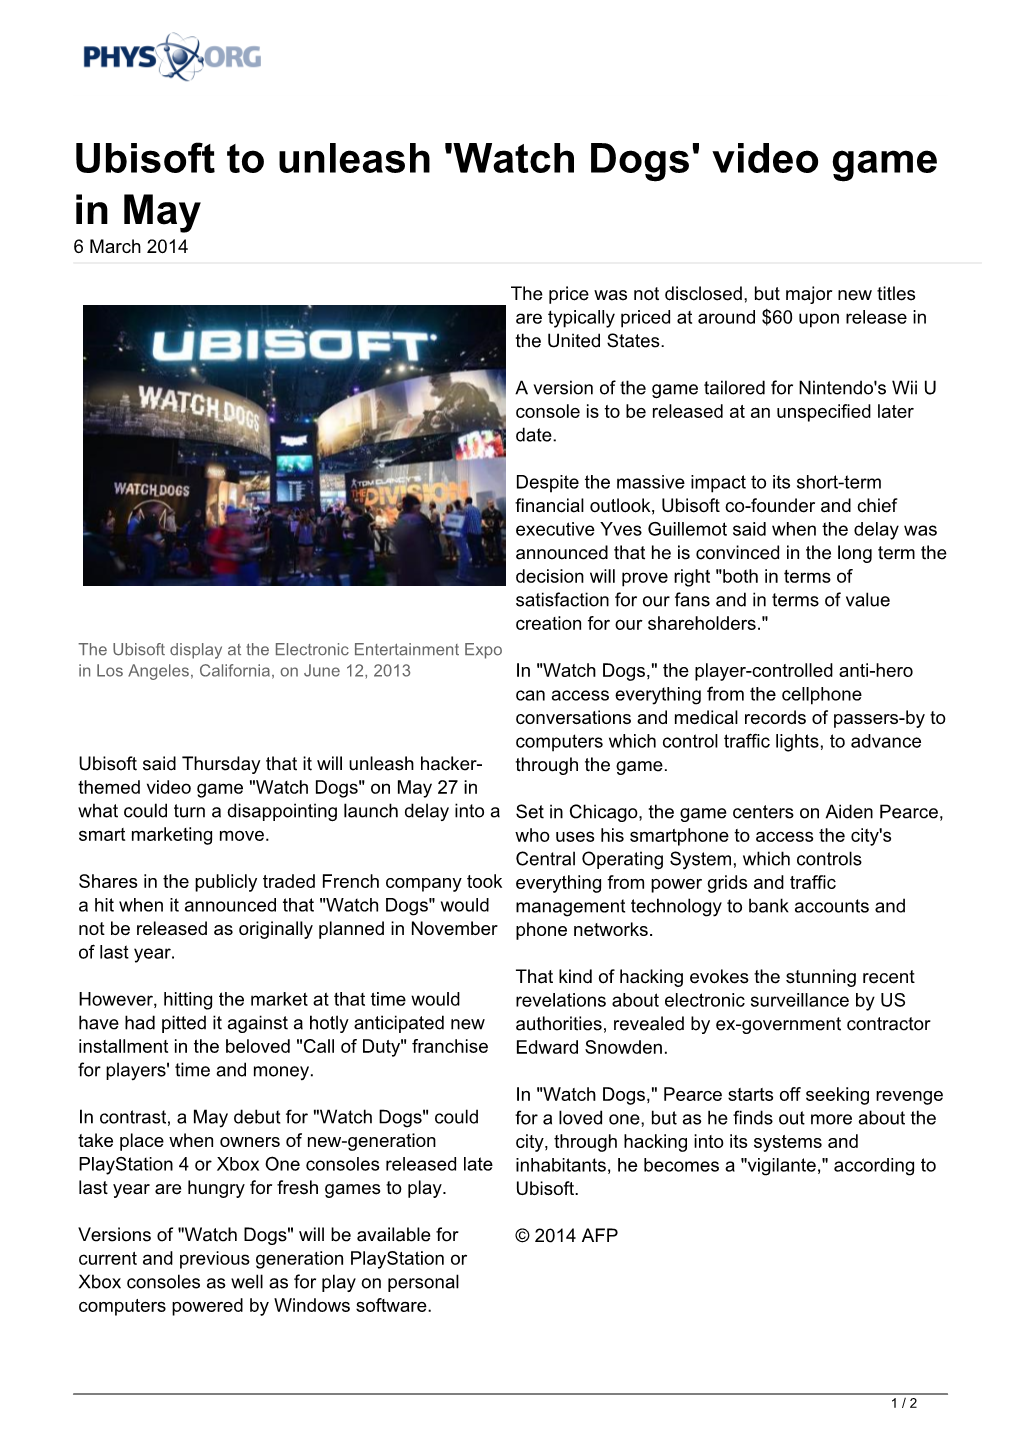 Ubisoft to Unleash 'Watch Dogs' Video Game in May 6 March 2014